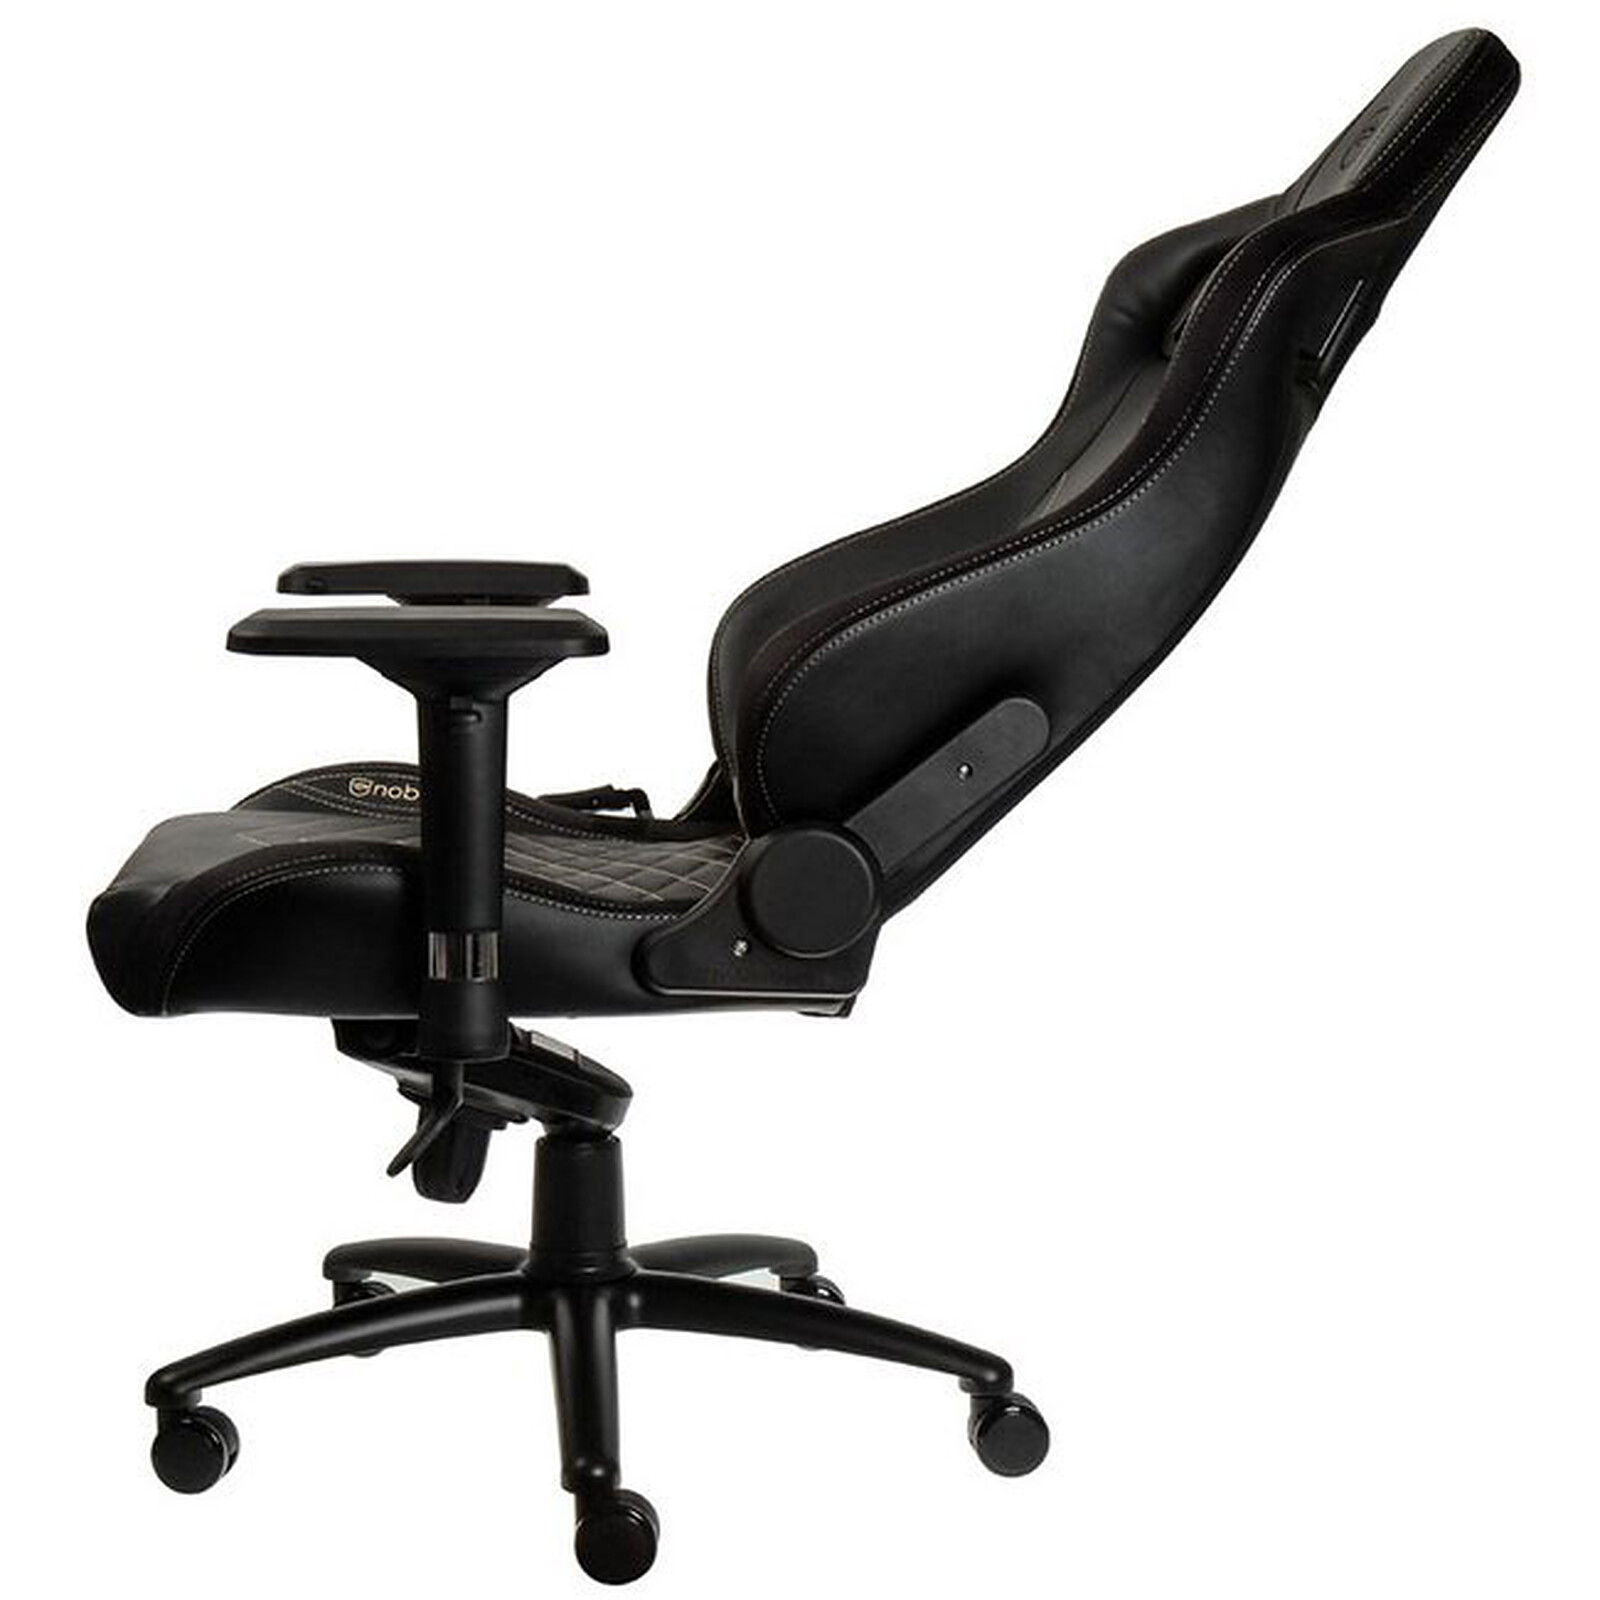 Noblechairs Epic (black/gold) - Gaming chair - LDLC 3-year warranty ...